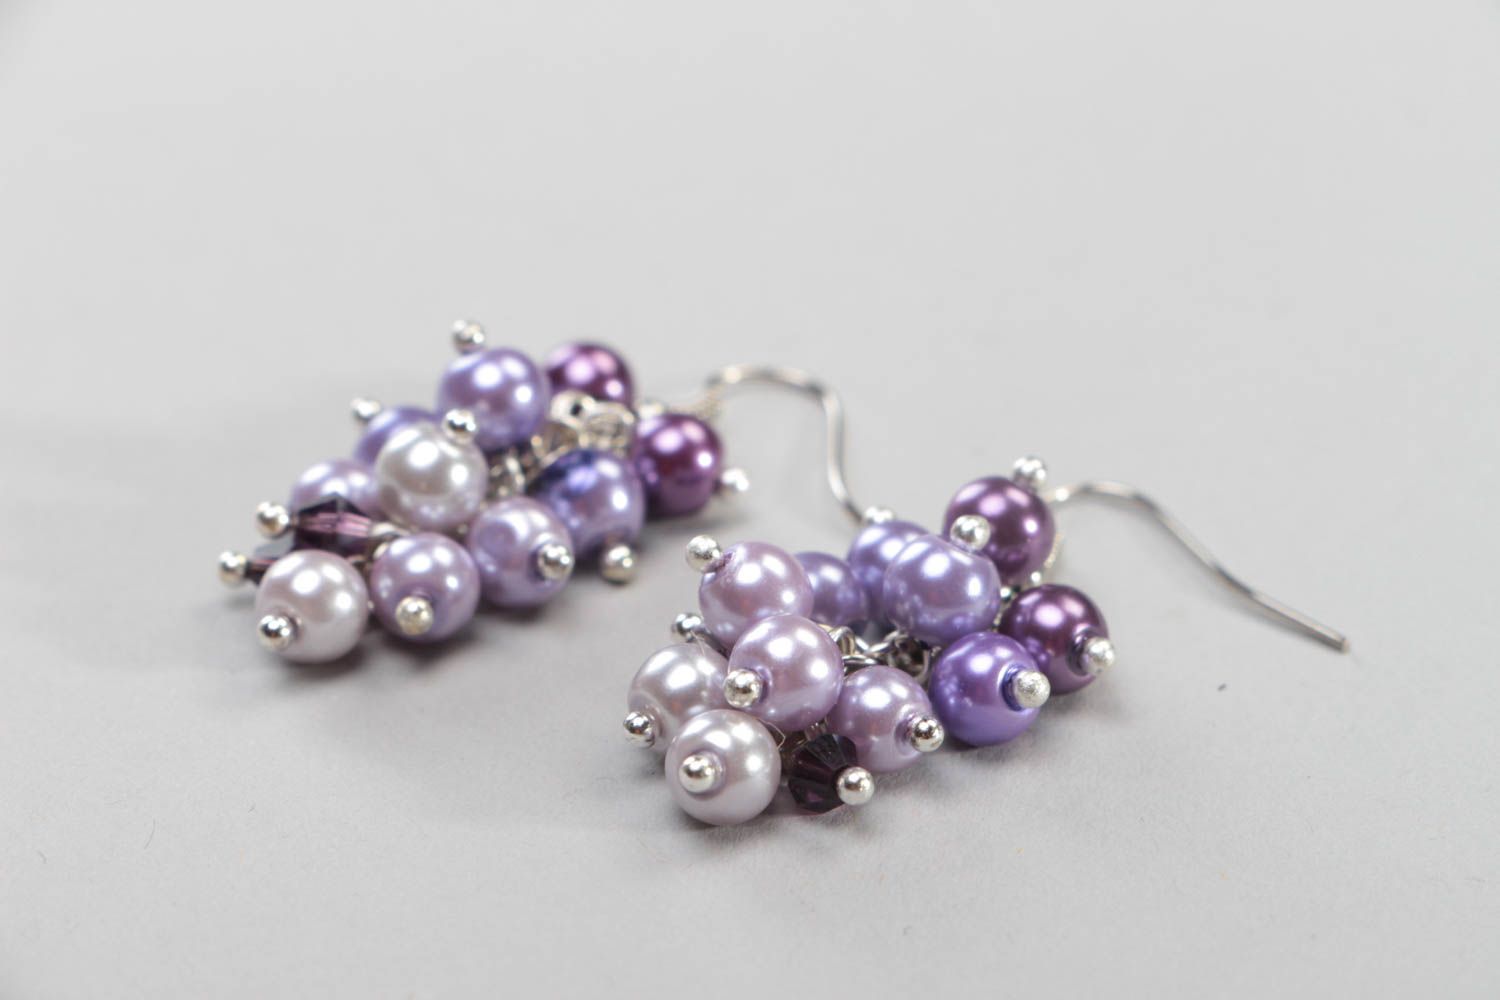 Handmade designer earring accessory made of ceramic pearls lilac jewelry photo 3